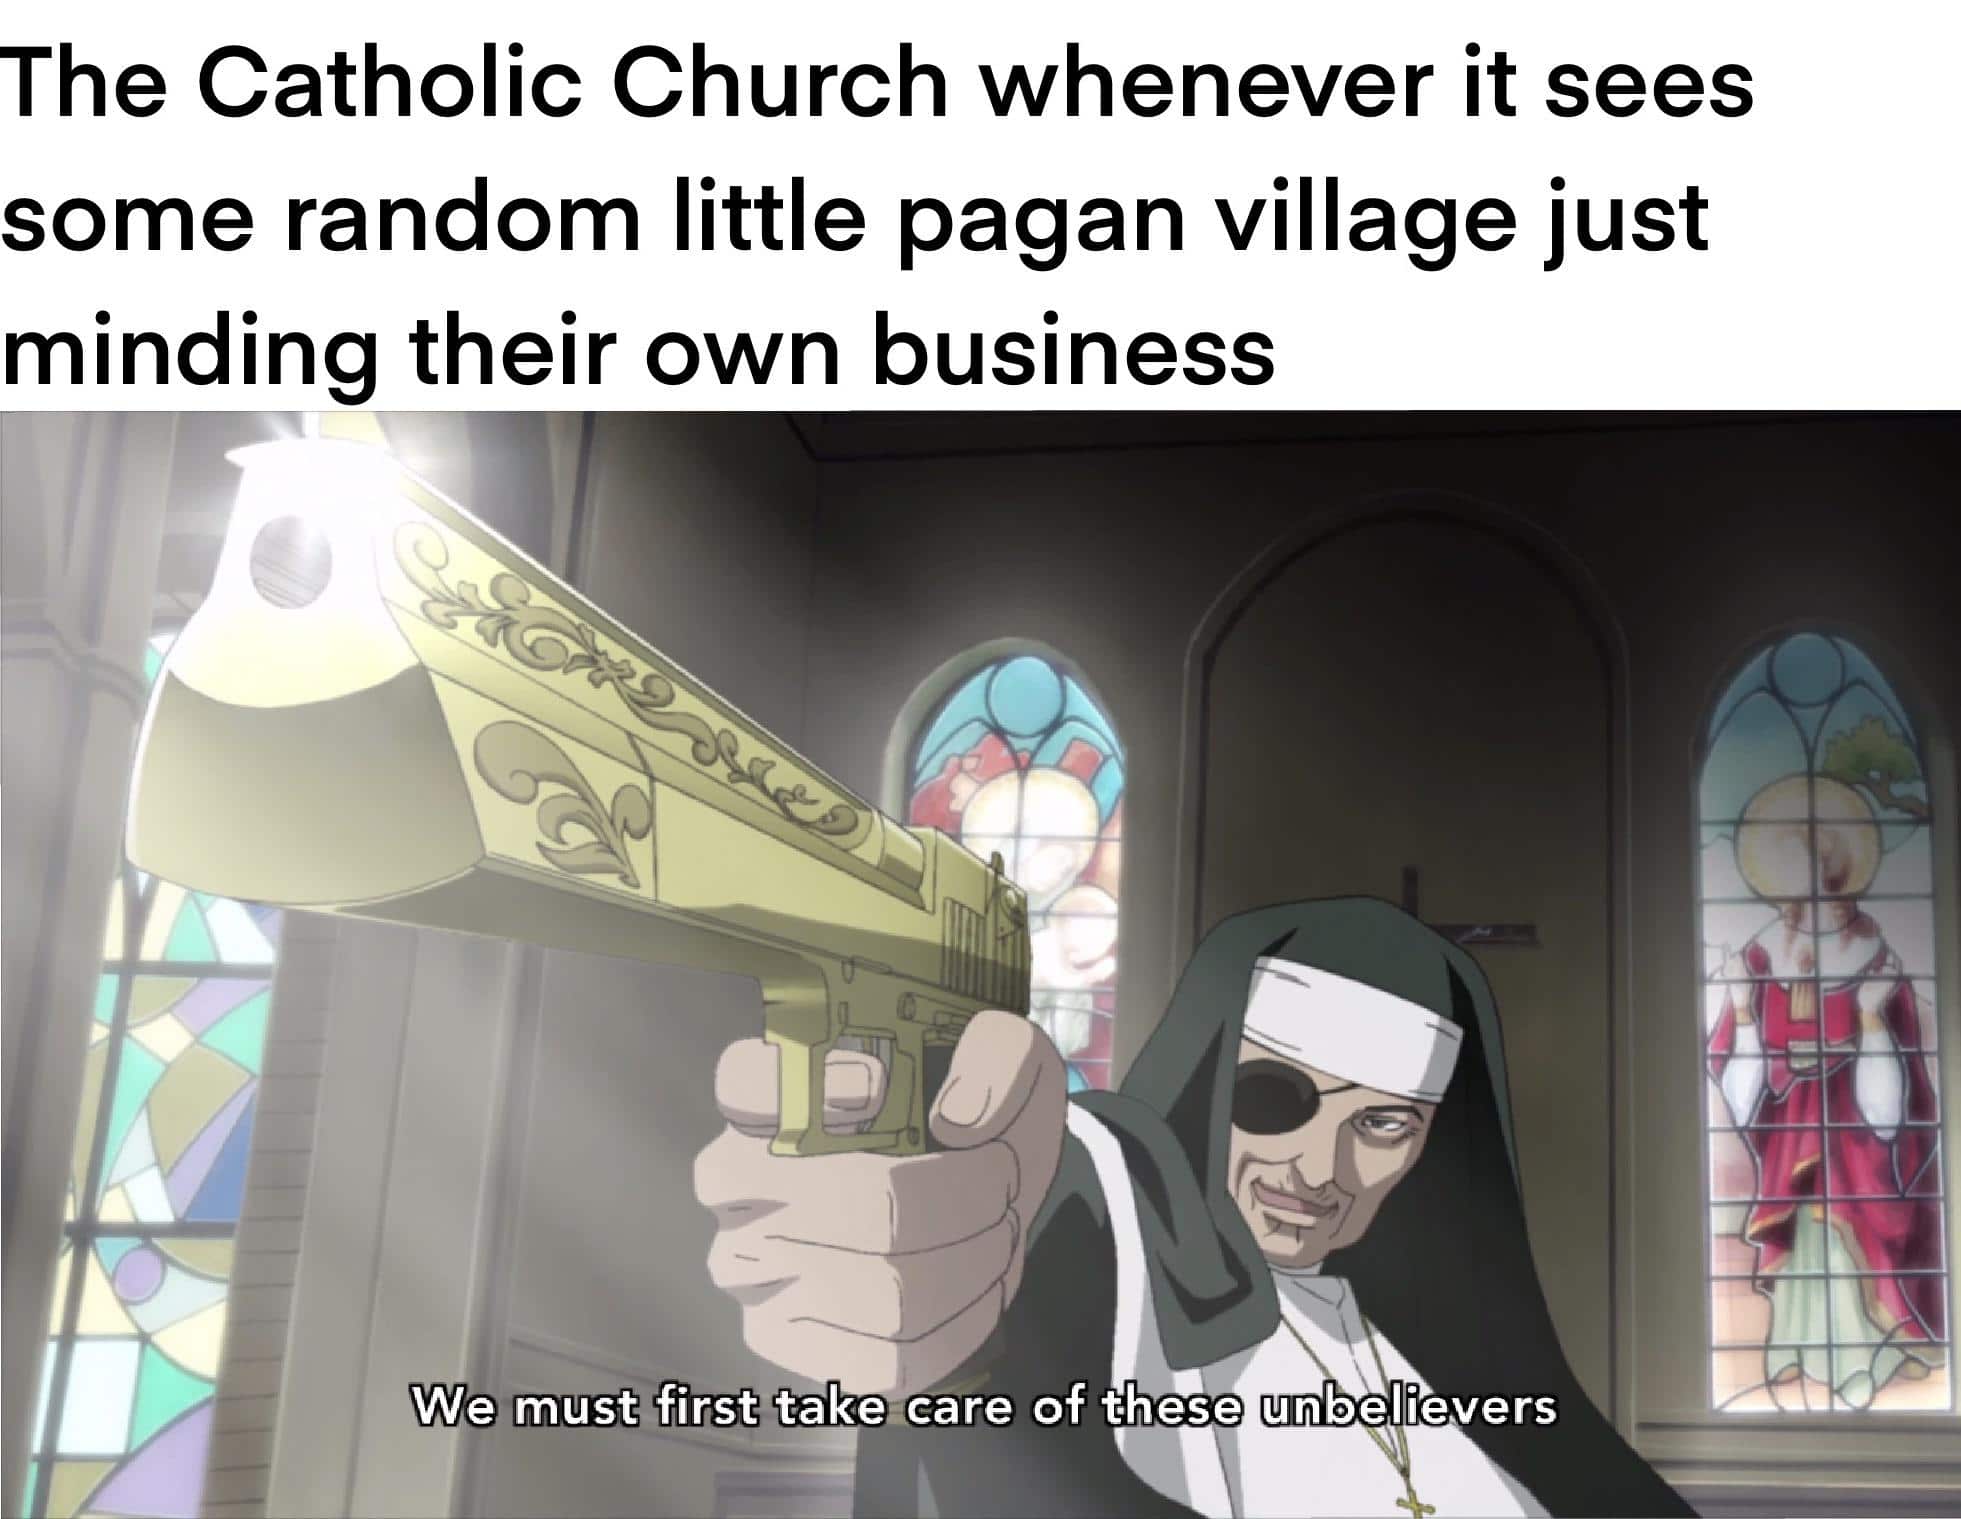 History, Church, Christians, Christian, Catholic Church, Catholic History Memes History, Church, Christians, Christian, Catholic Church, Catholic text: The Catholic Church whenever it sees some random little pagan village just minding their own business Wemusefjr.t!tåkezcare of these unbelievers 